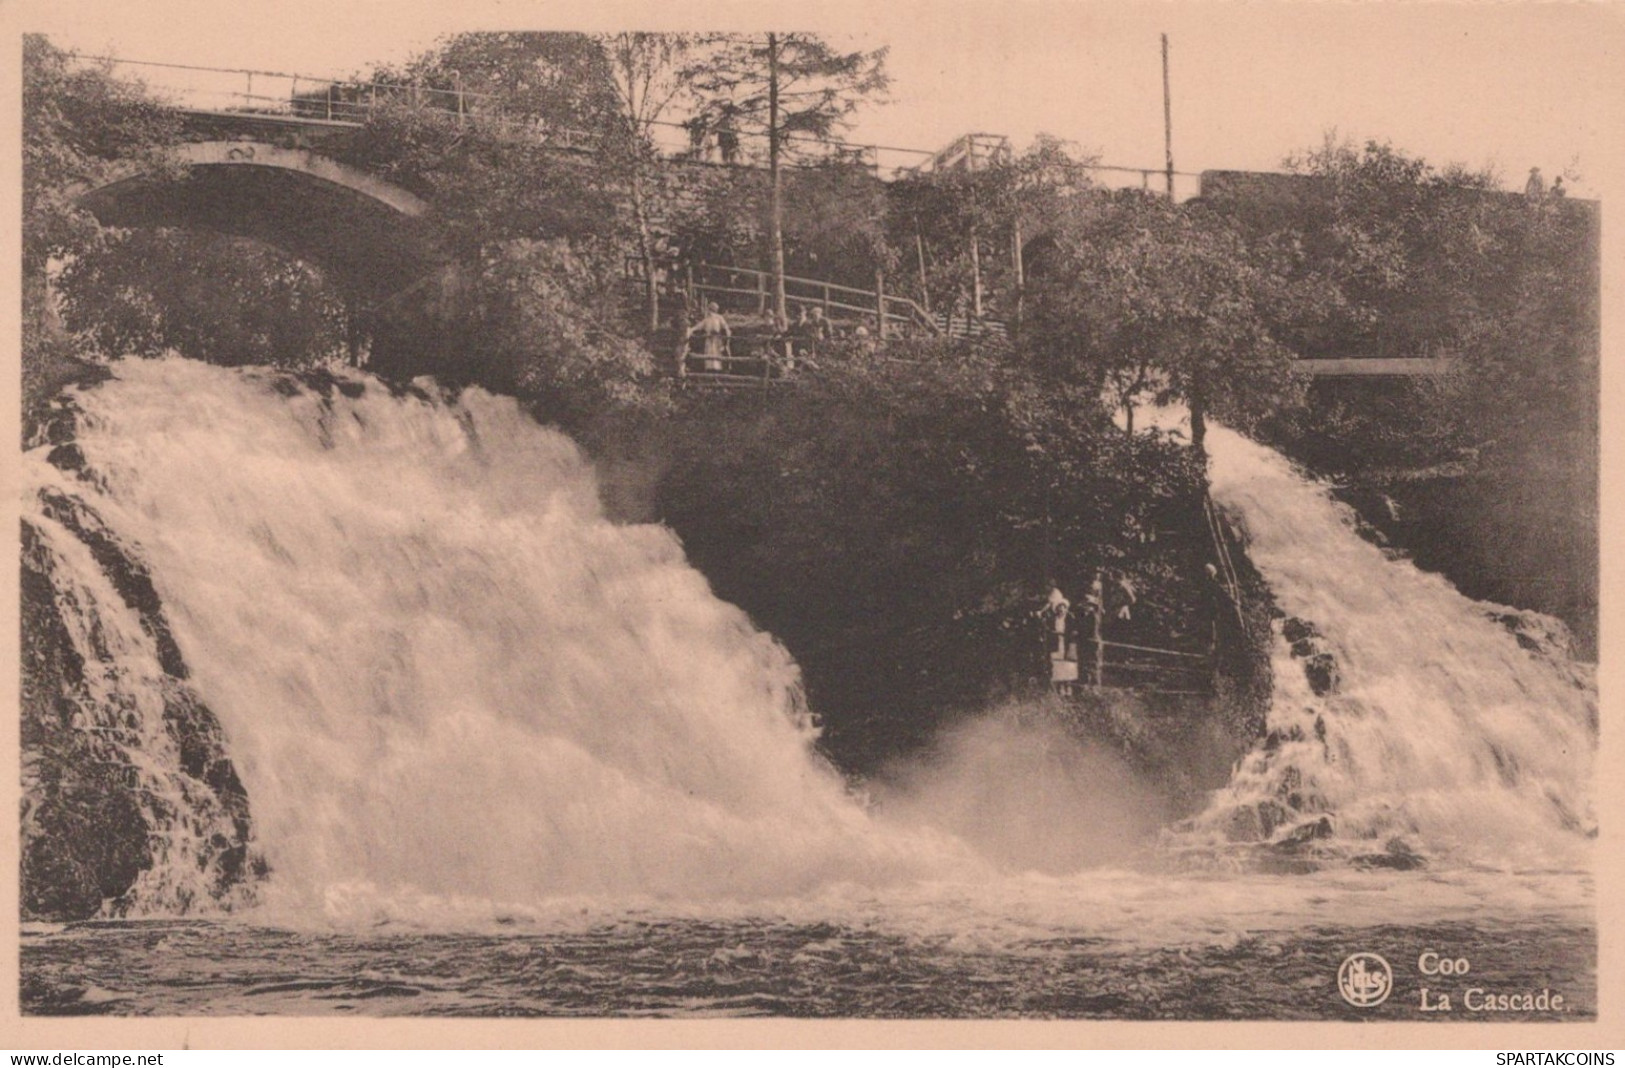 BELGIUM COO WATERFALL Province Of Liège Postcard CPA Unposted #PAD087.GB - Stavelot